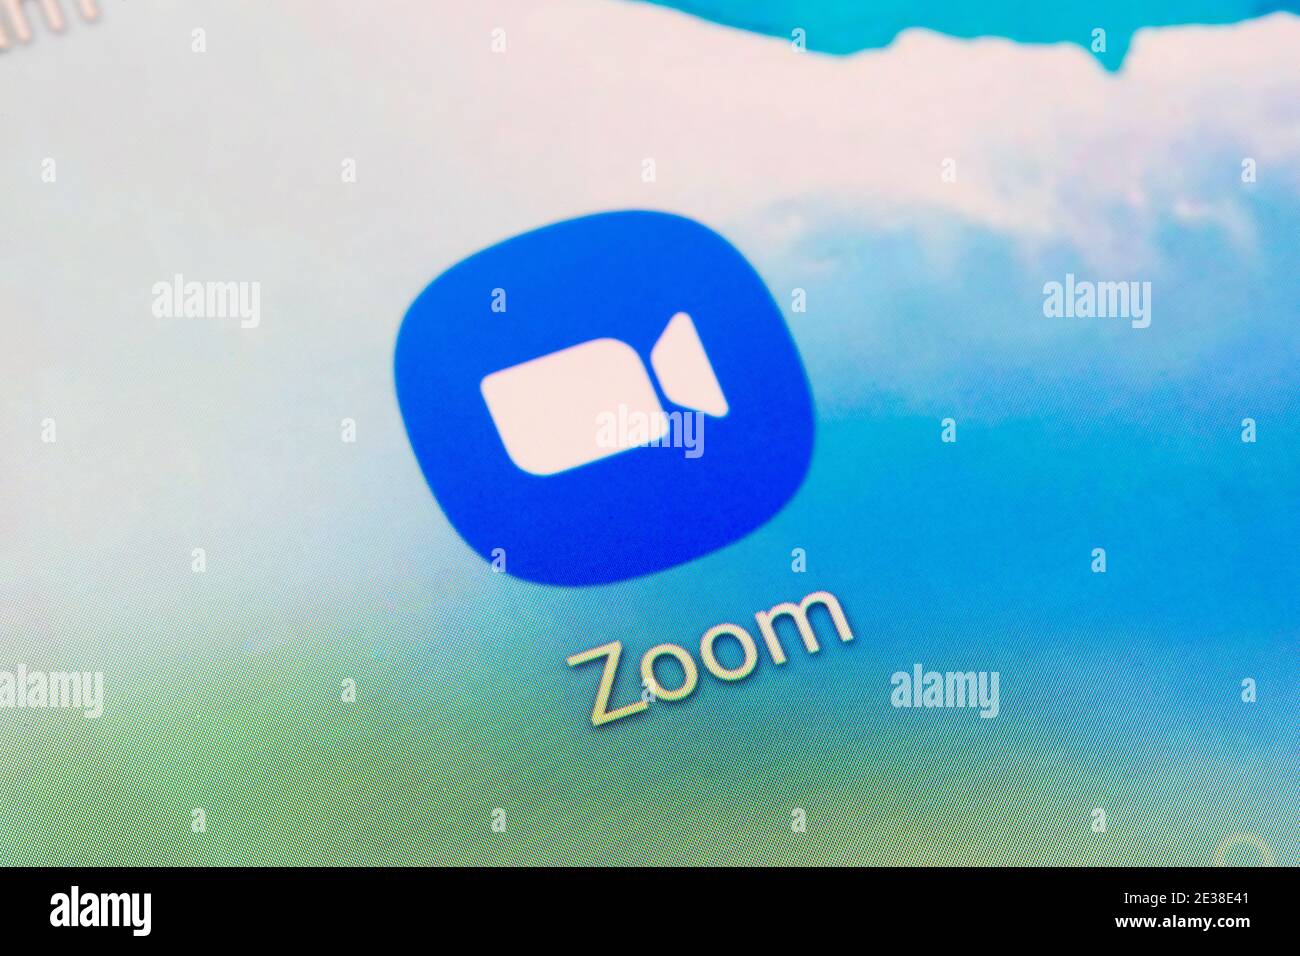 A closeup of the app logo for Zoom - a videotelephony software program developed by Zoom Video Communications Stock Photo